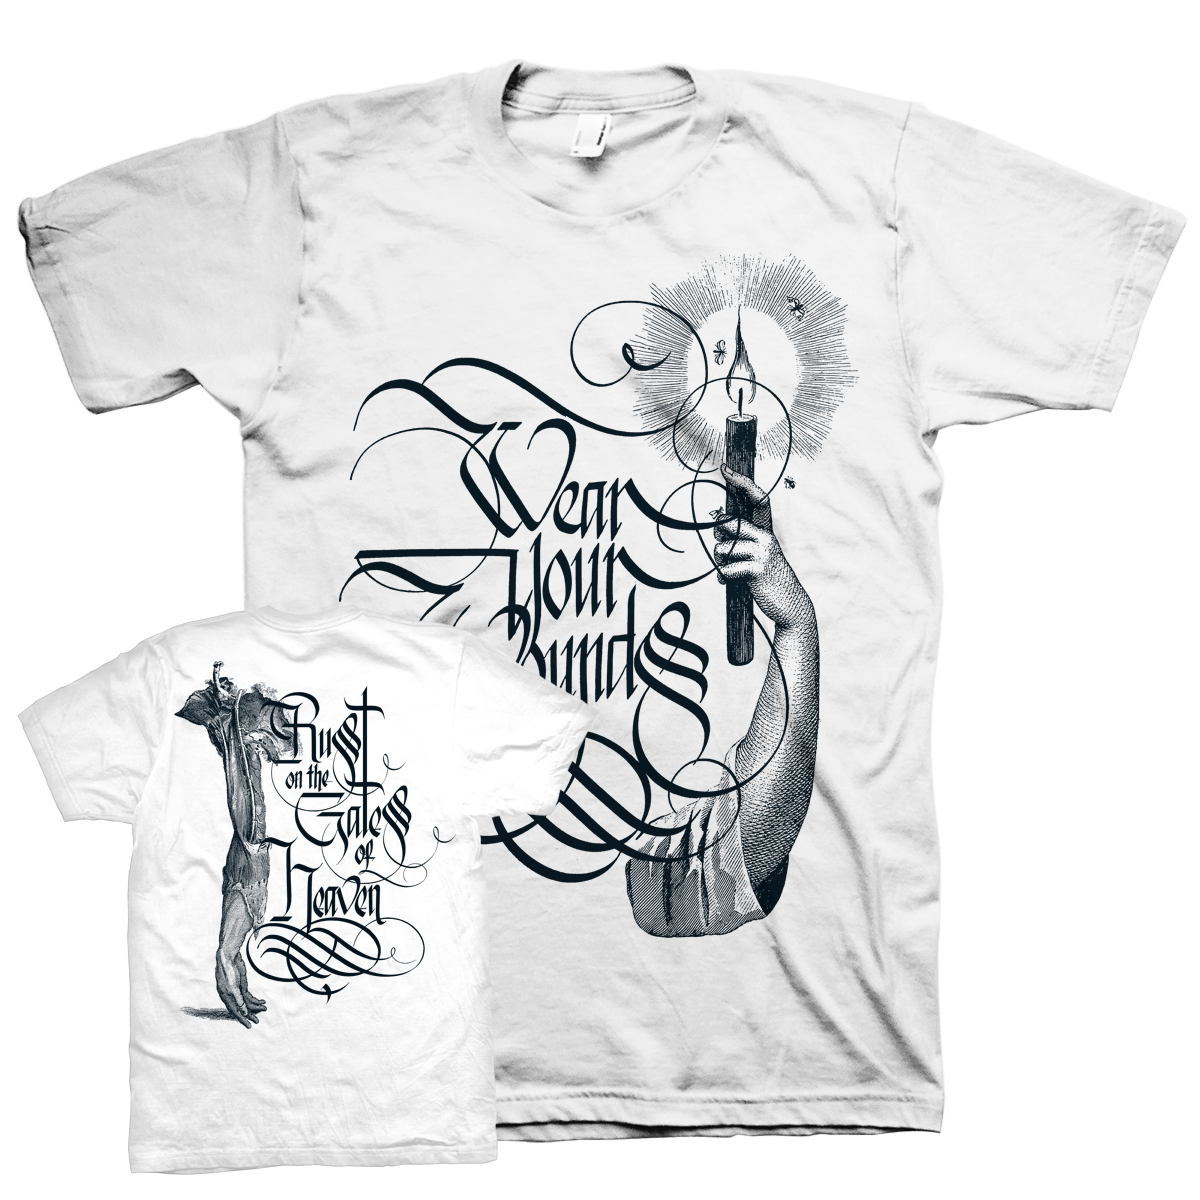 Wear Your Wounds "Candle of Heaven" T-Shirt